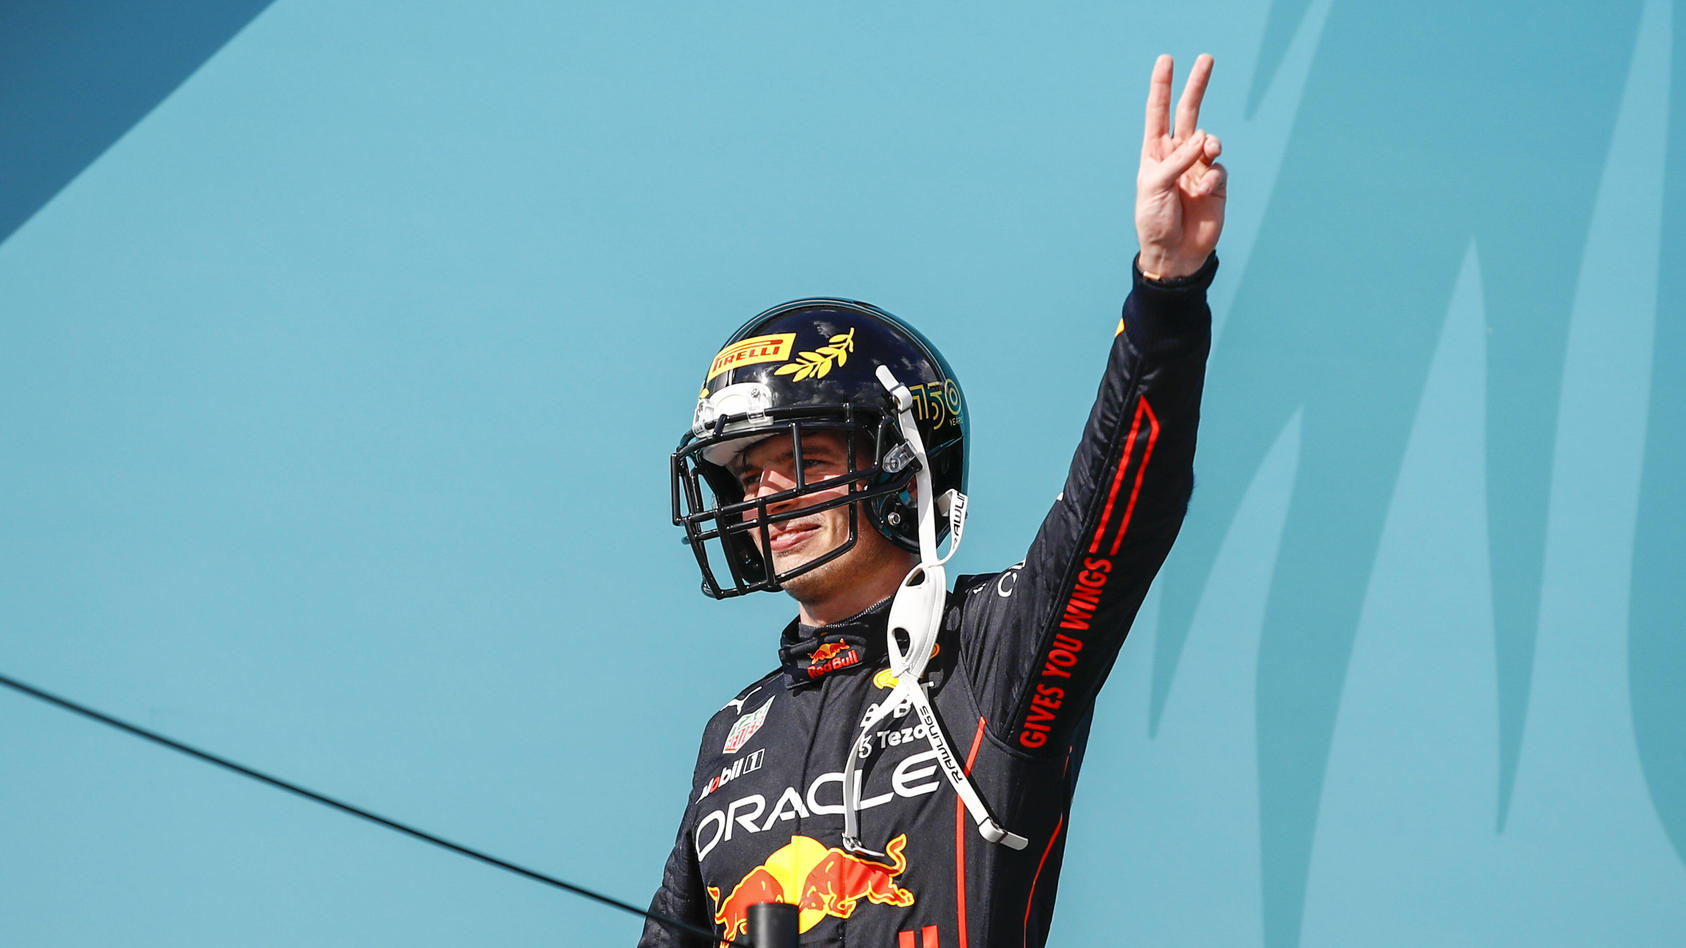  1 Max Verstappen NLD, Oracle Red Bull Racing, F1 Grand Prix of Miami at Miami International Autodrome on May 8, 2022 in Miami, United States of America. Photo by HOCH ZWEI Miami United States of America *** 1 Max Verstappen NLD, Oracle Red Bull Raci